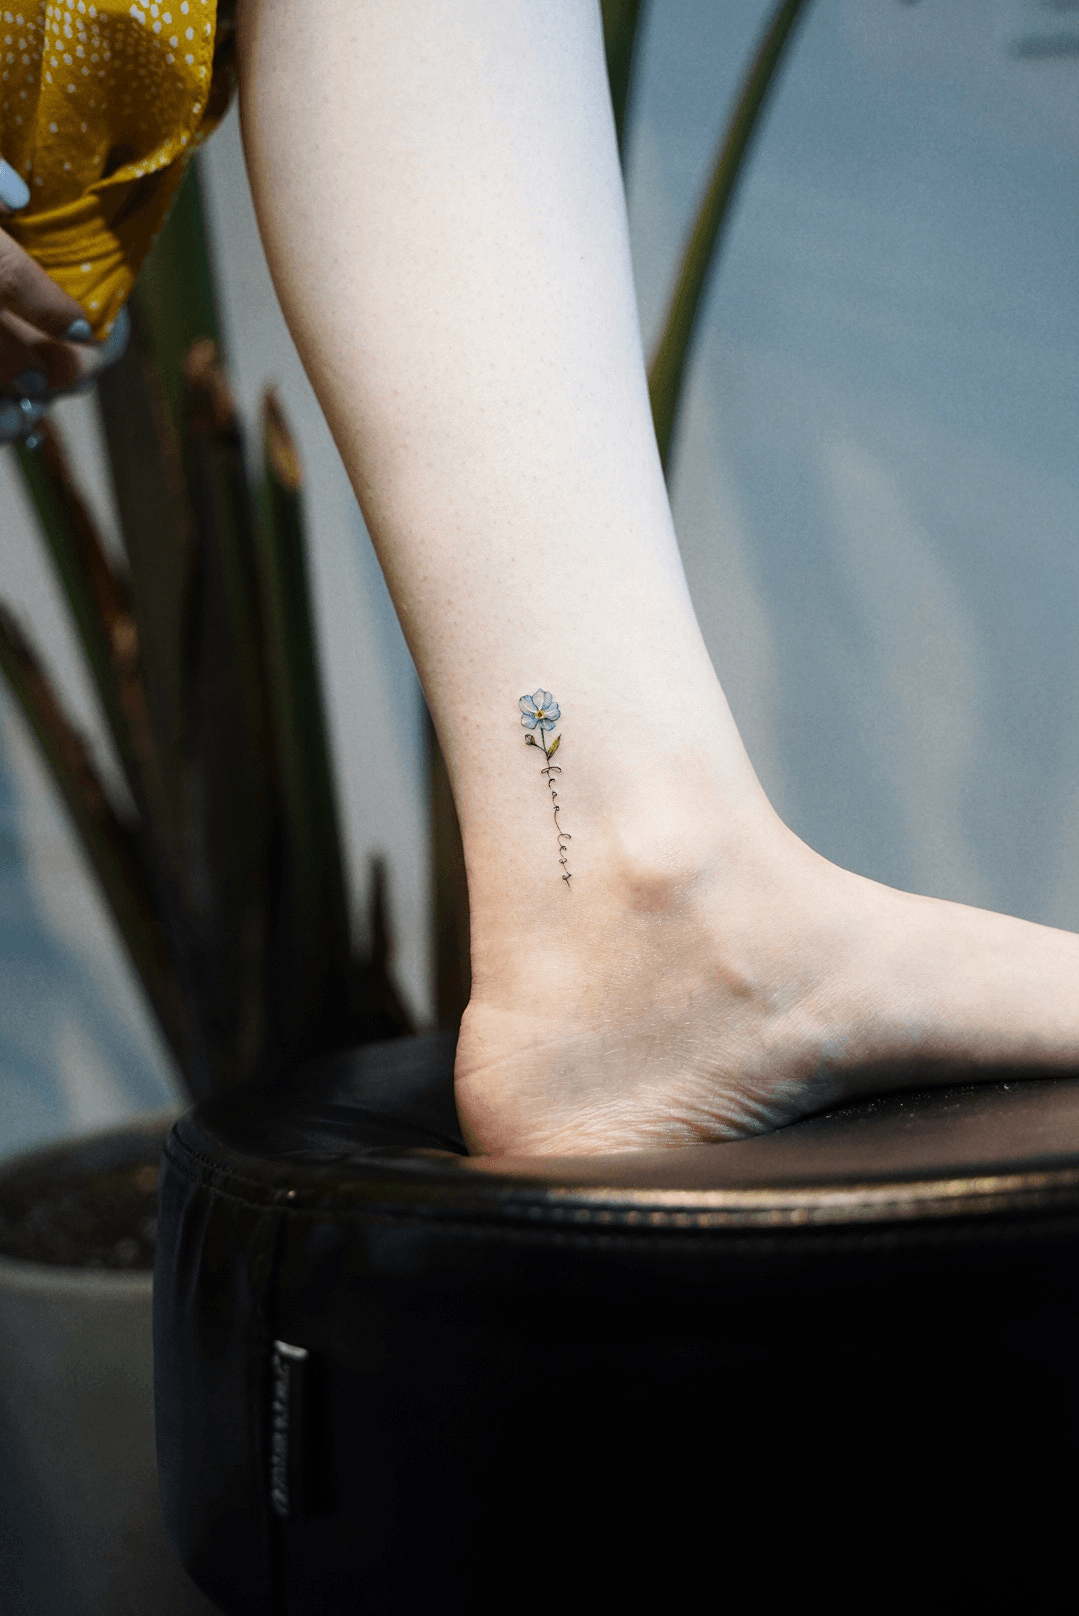 Elegant forget me not tattoo on the inner wrist  Tattoos Wrist tattoos  Minimalist tattoo